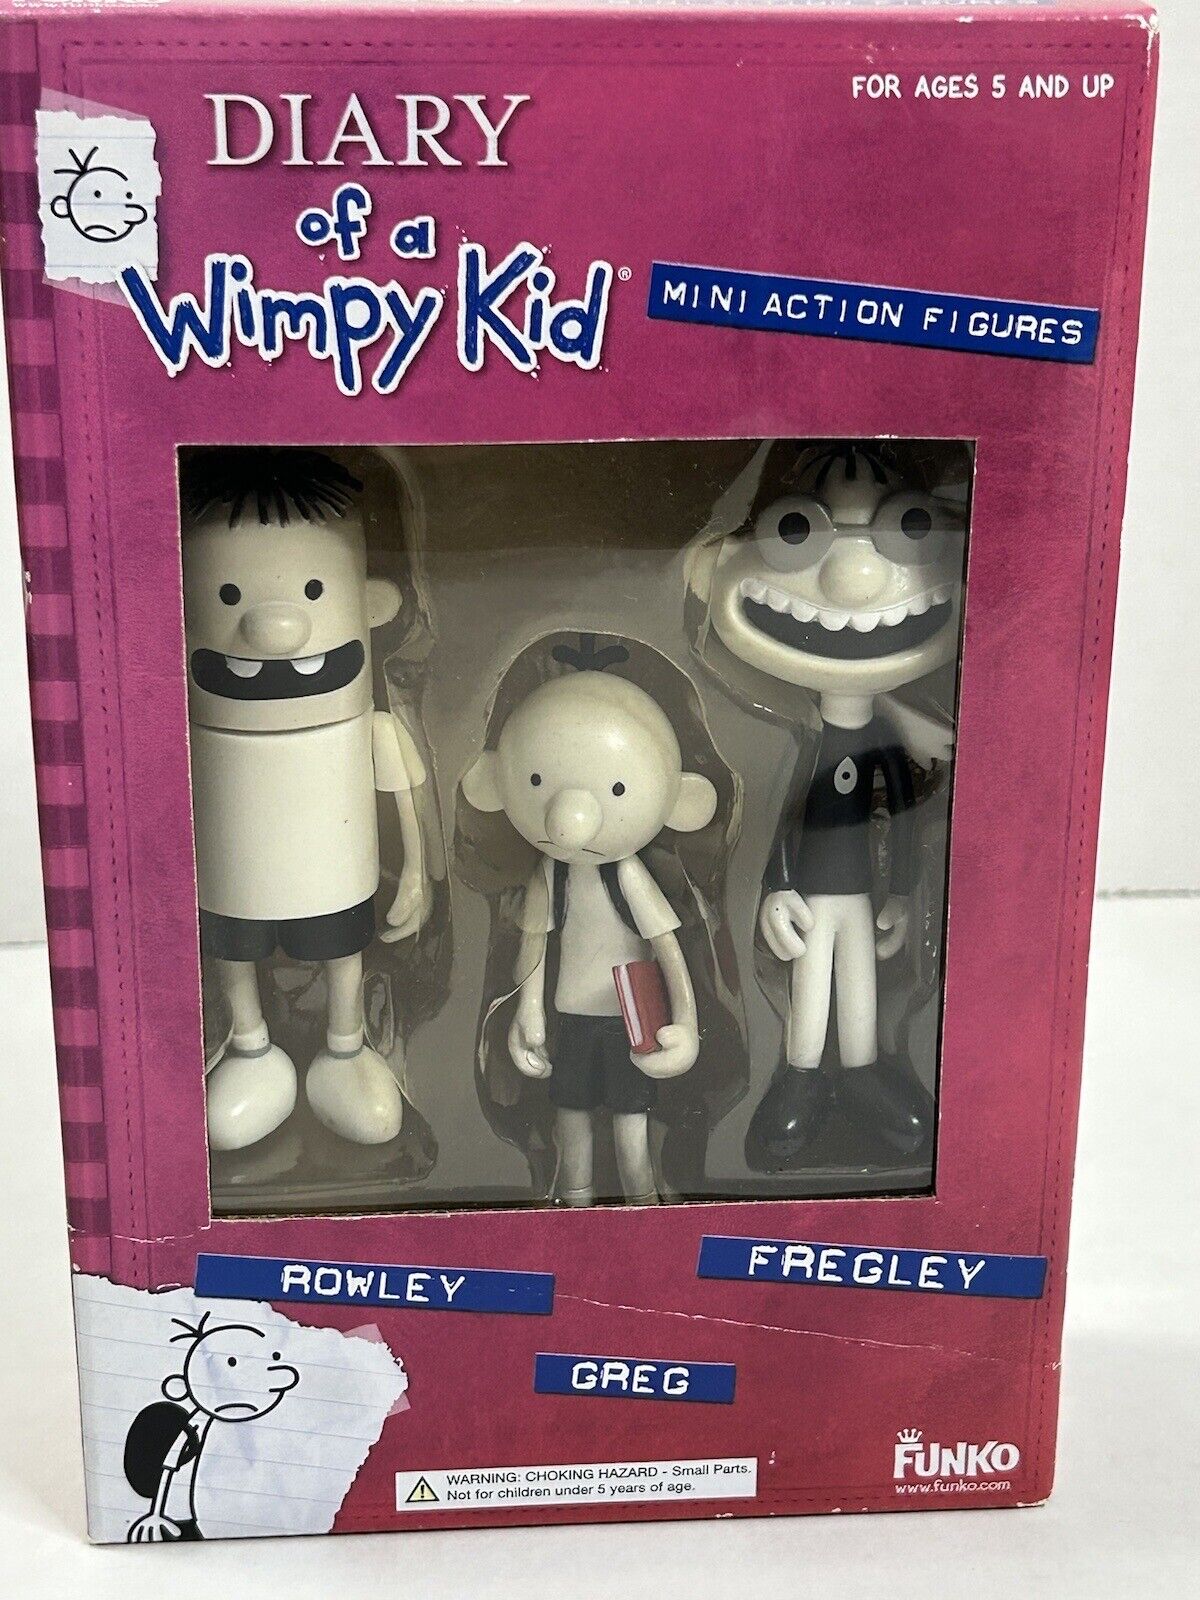 2011 Diary Of A Wimpy Kid Mini Action Figures - 3 Pack - Funko - NEW RARE